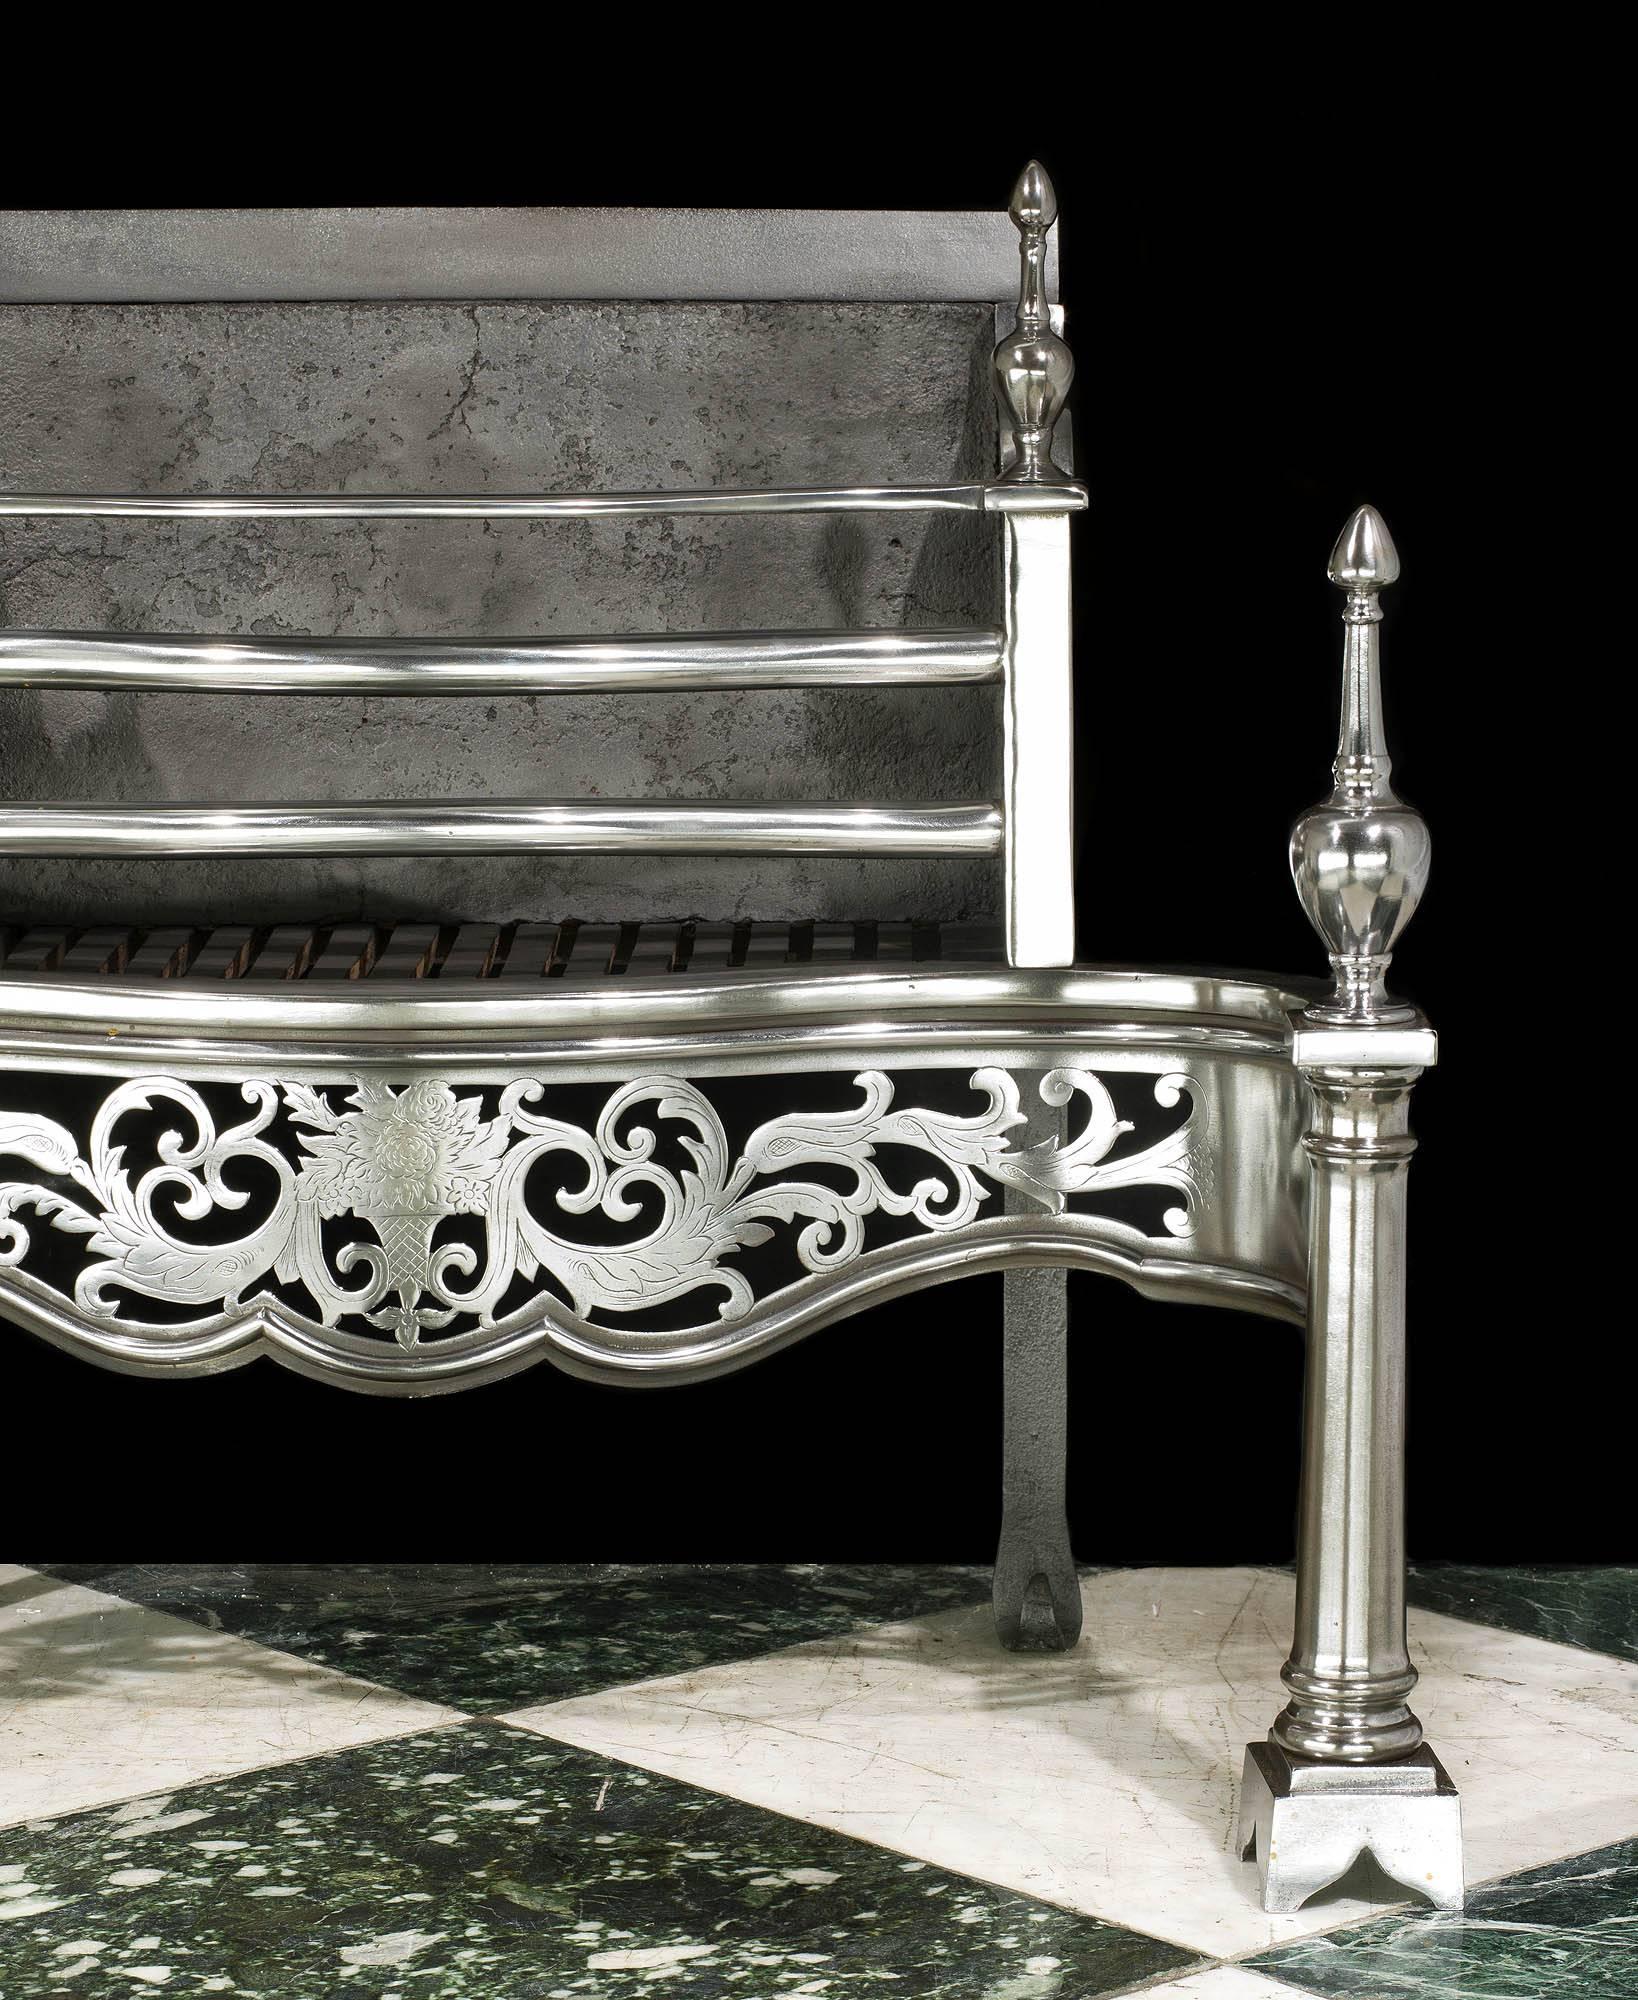 Great Britain (UK) Fine Antique English George III Style Polished Steel Fire Grate, circa 1880